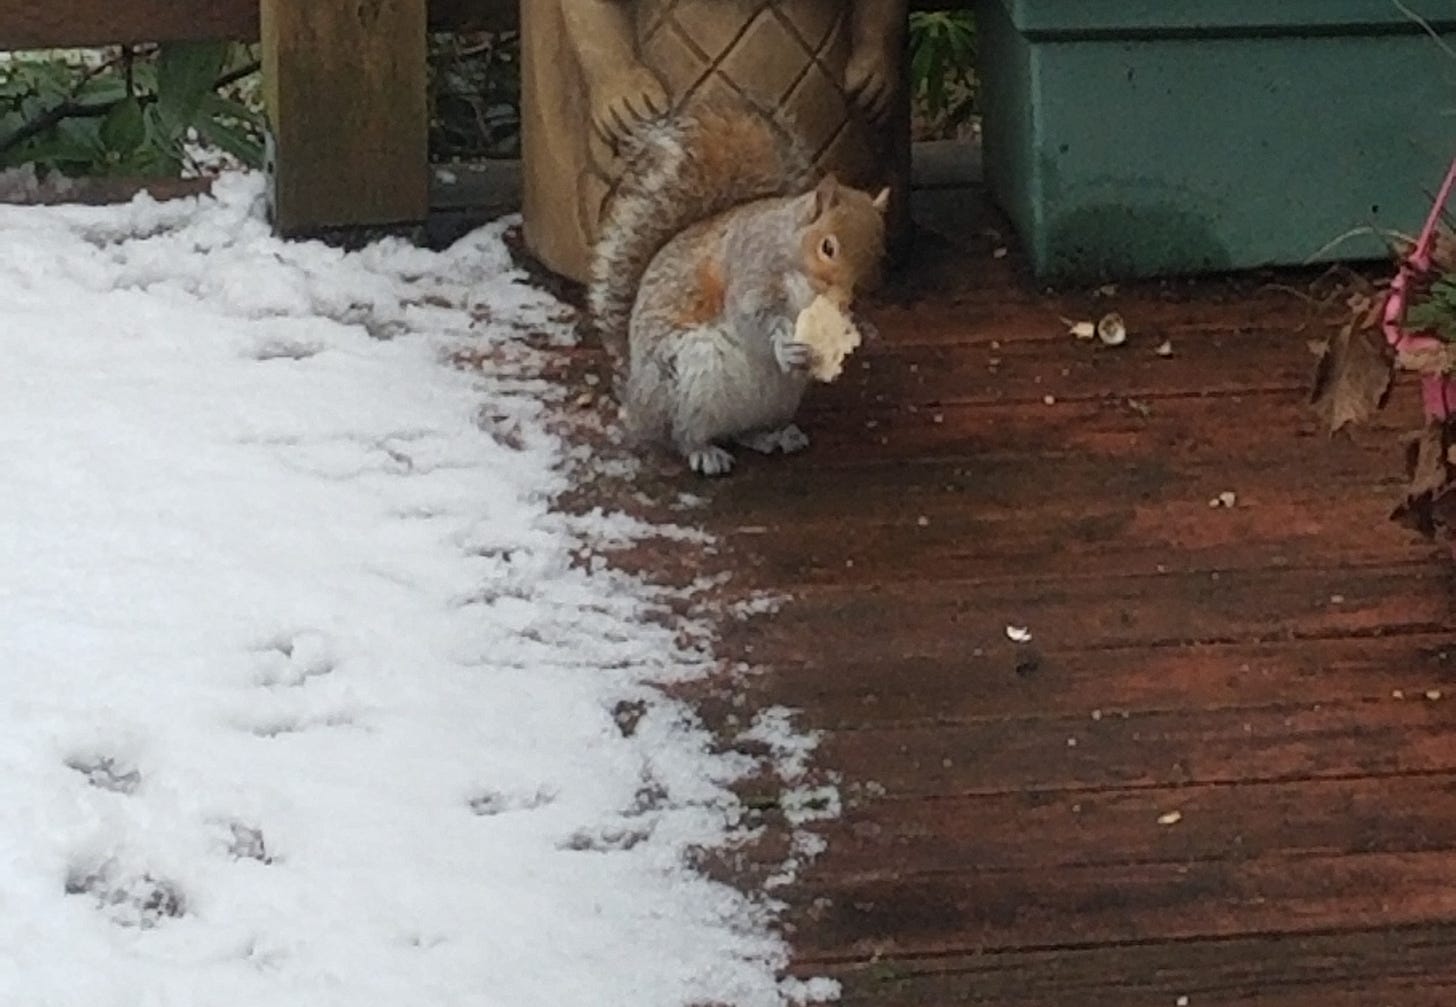 squirrel eating bit of bread next to some wet snow on a wood patio